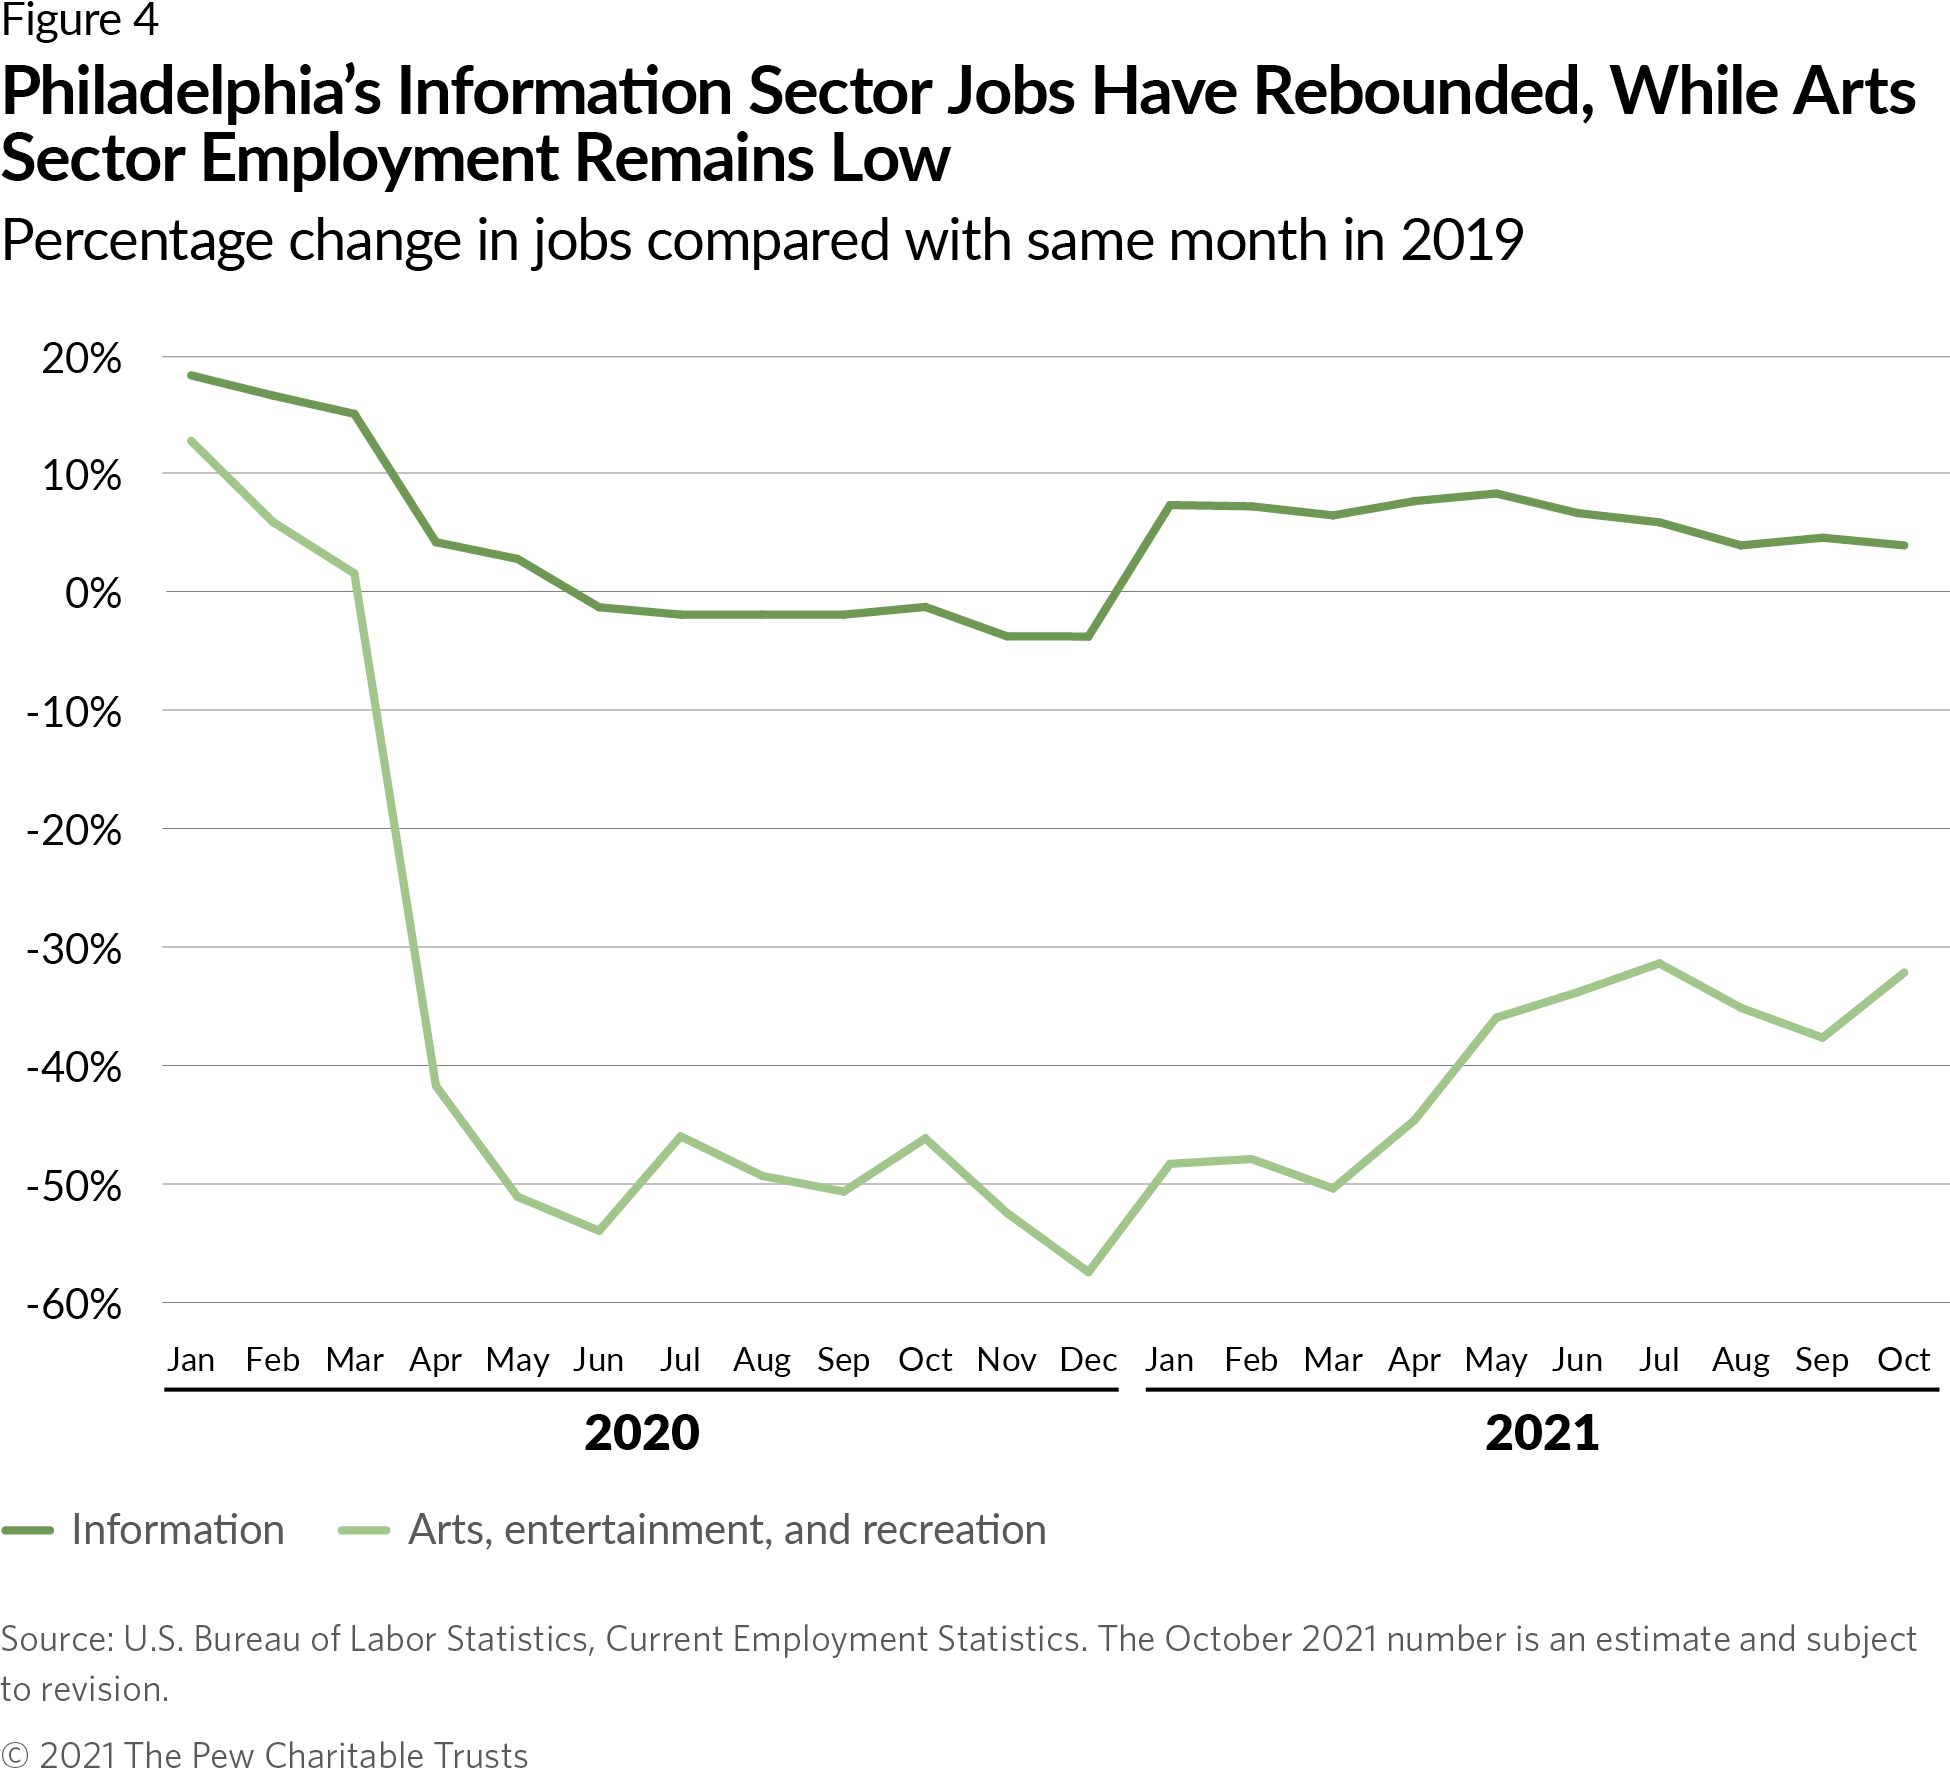 Philadelphia's Information Sector Jobs Have Rebounded, While Arts Sector Employment Remains Low. Percentage change in jobs compared with same month in 2019.